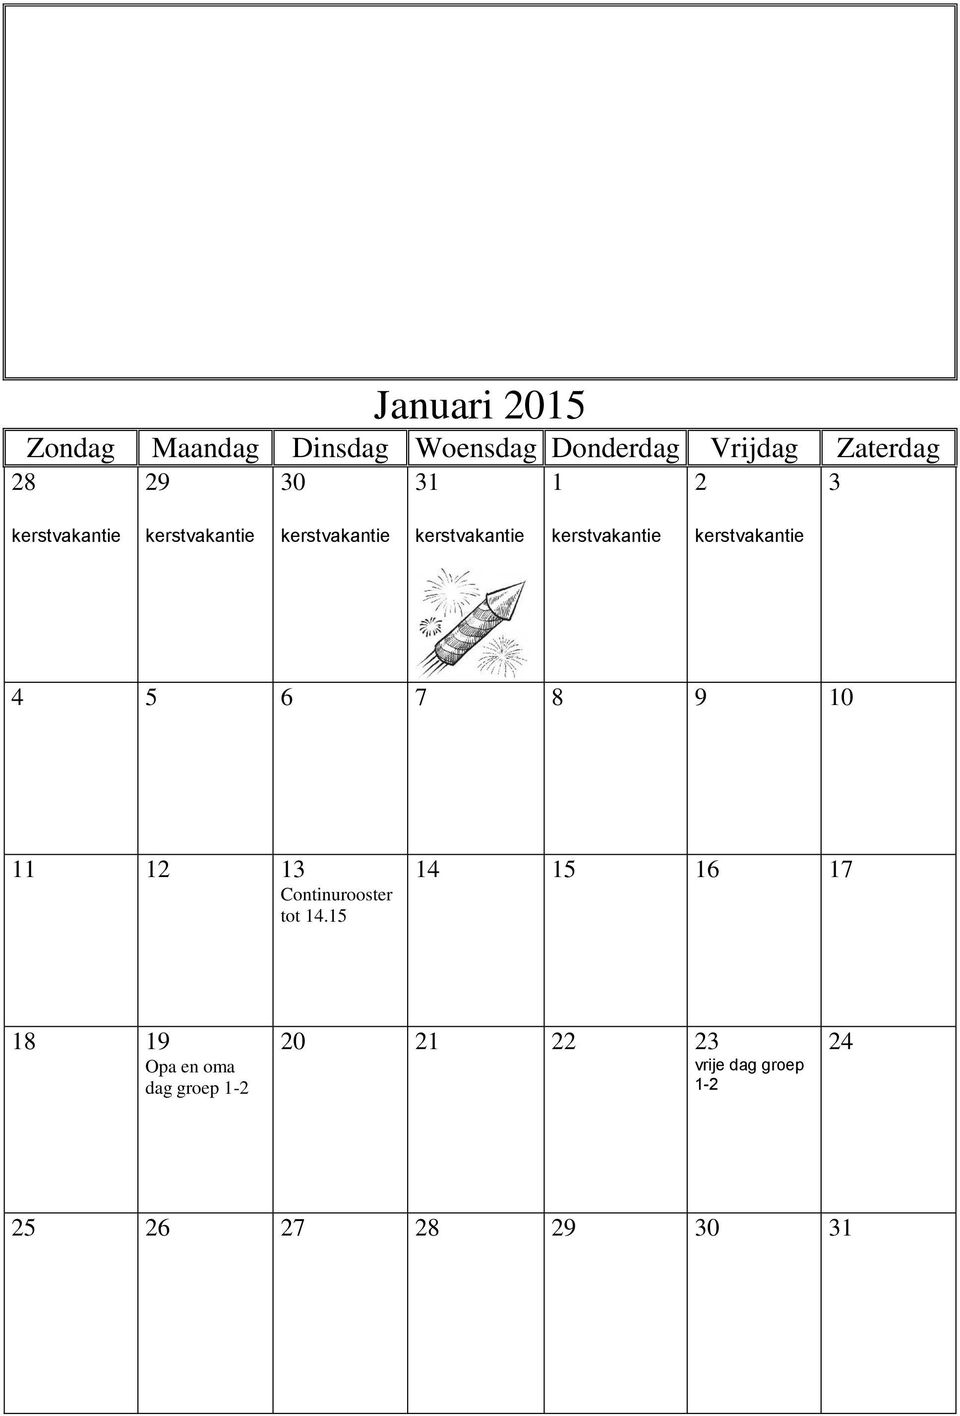 Continurooster tot 14.